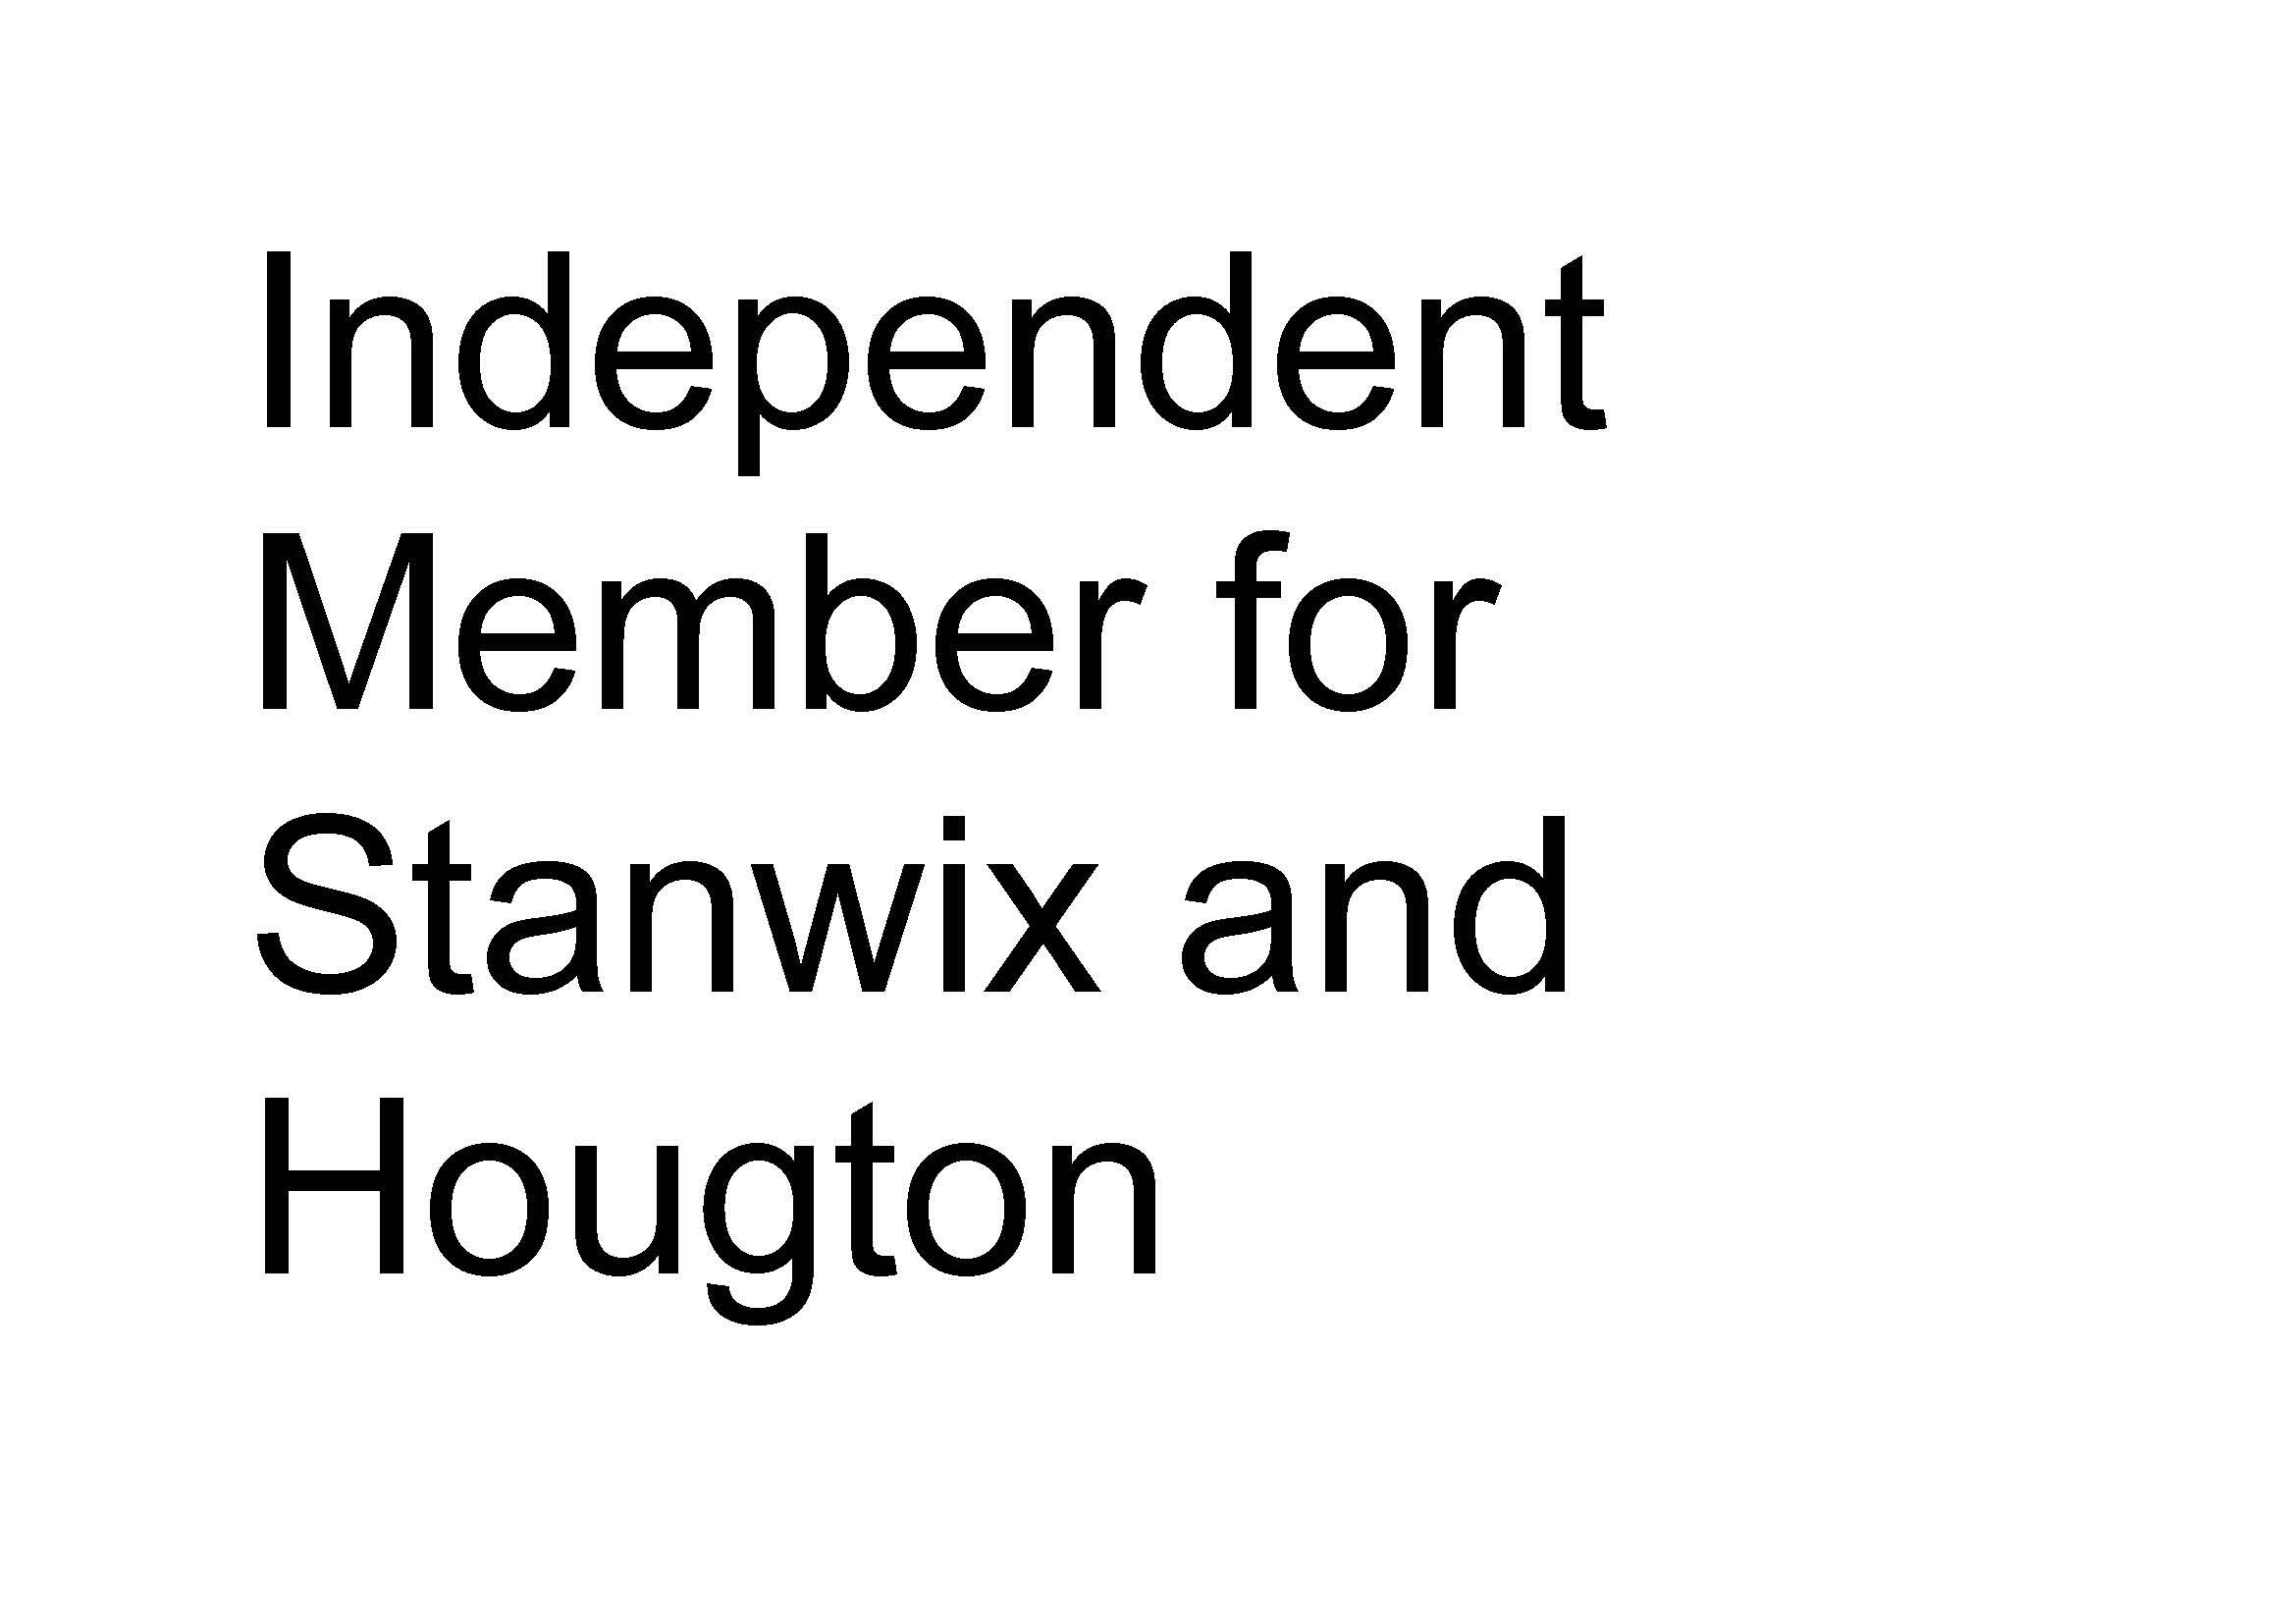 Independent Member for Stanwix and Houghton (logo)